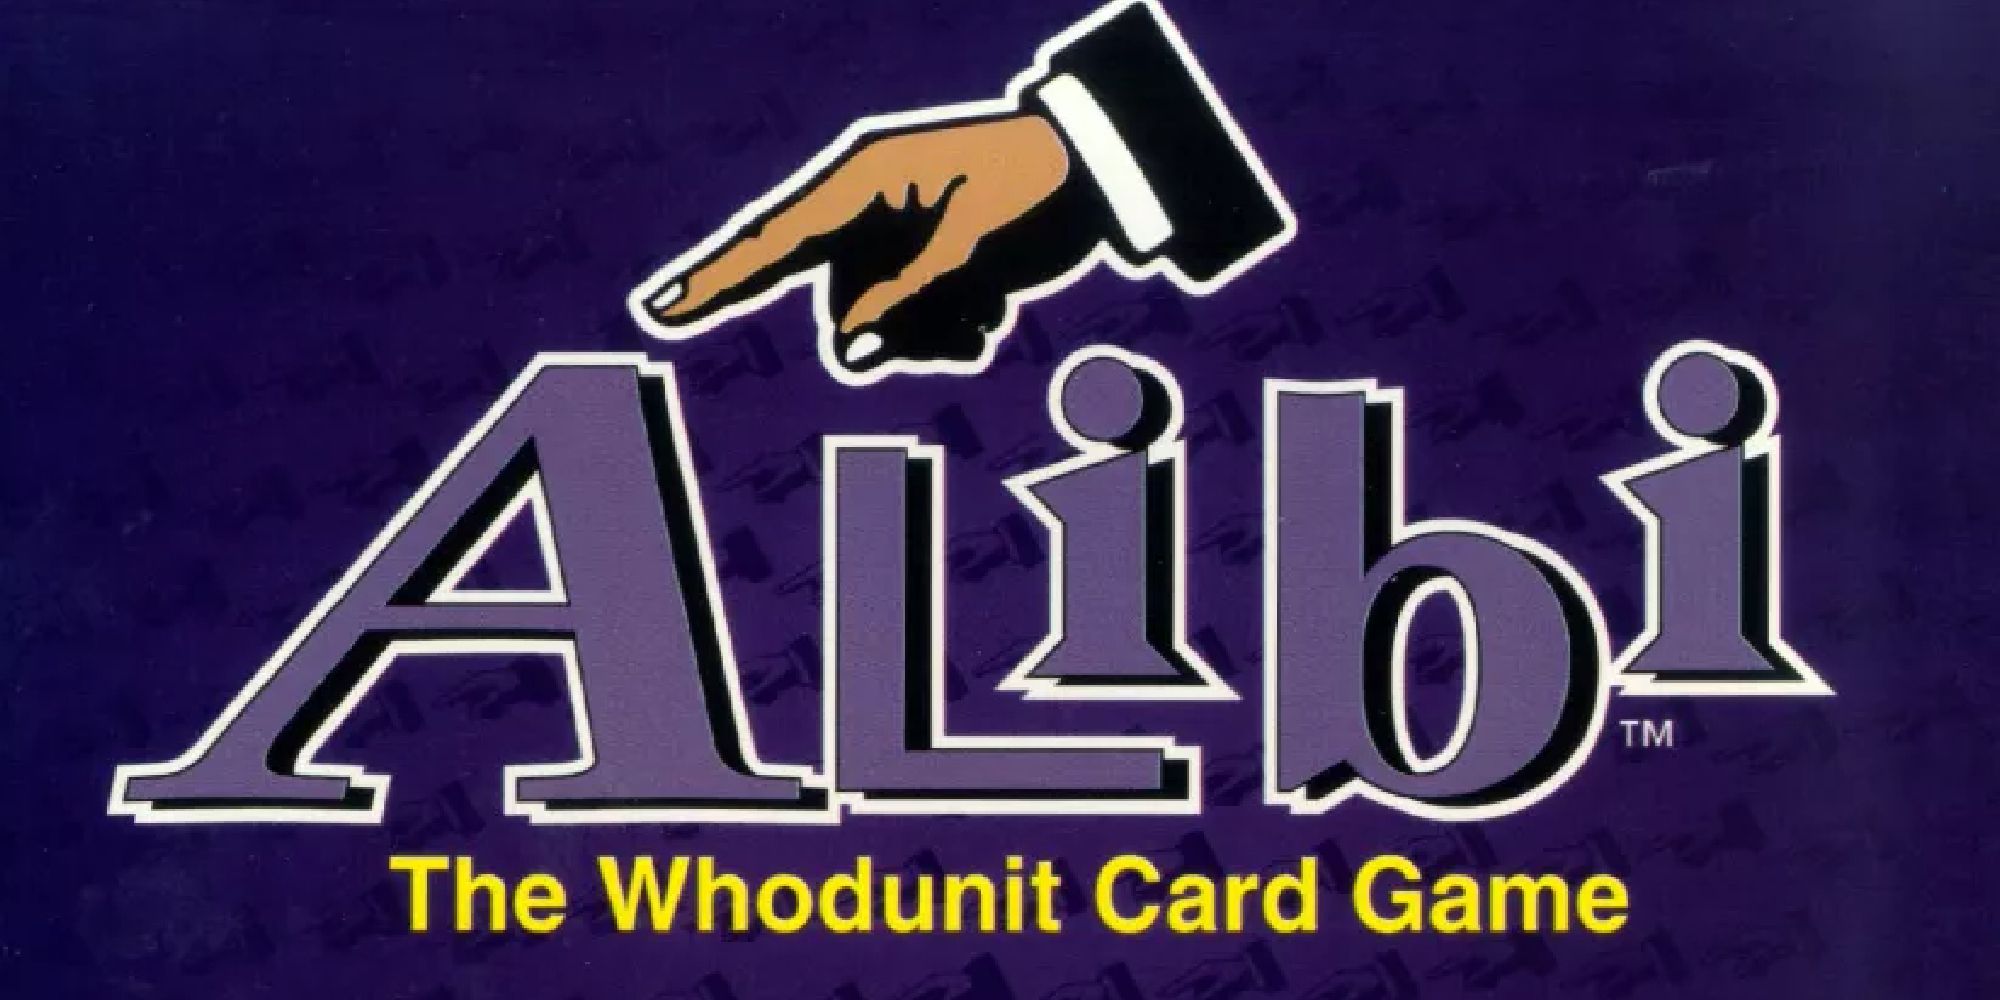 The logo for Alibi: The Whodunit Card Game, with a hand pointing at the A